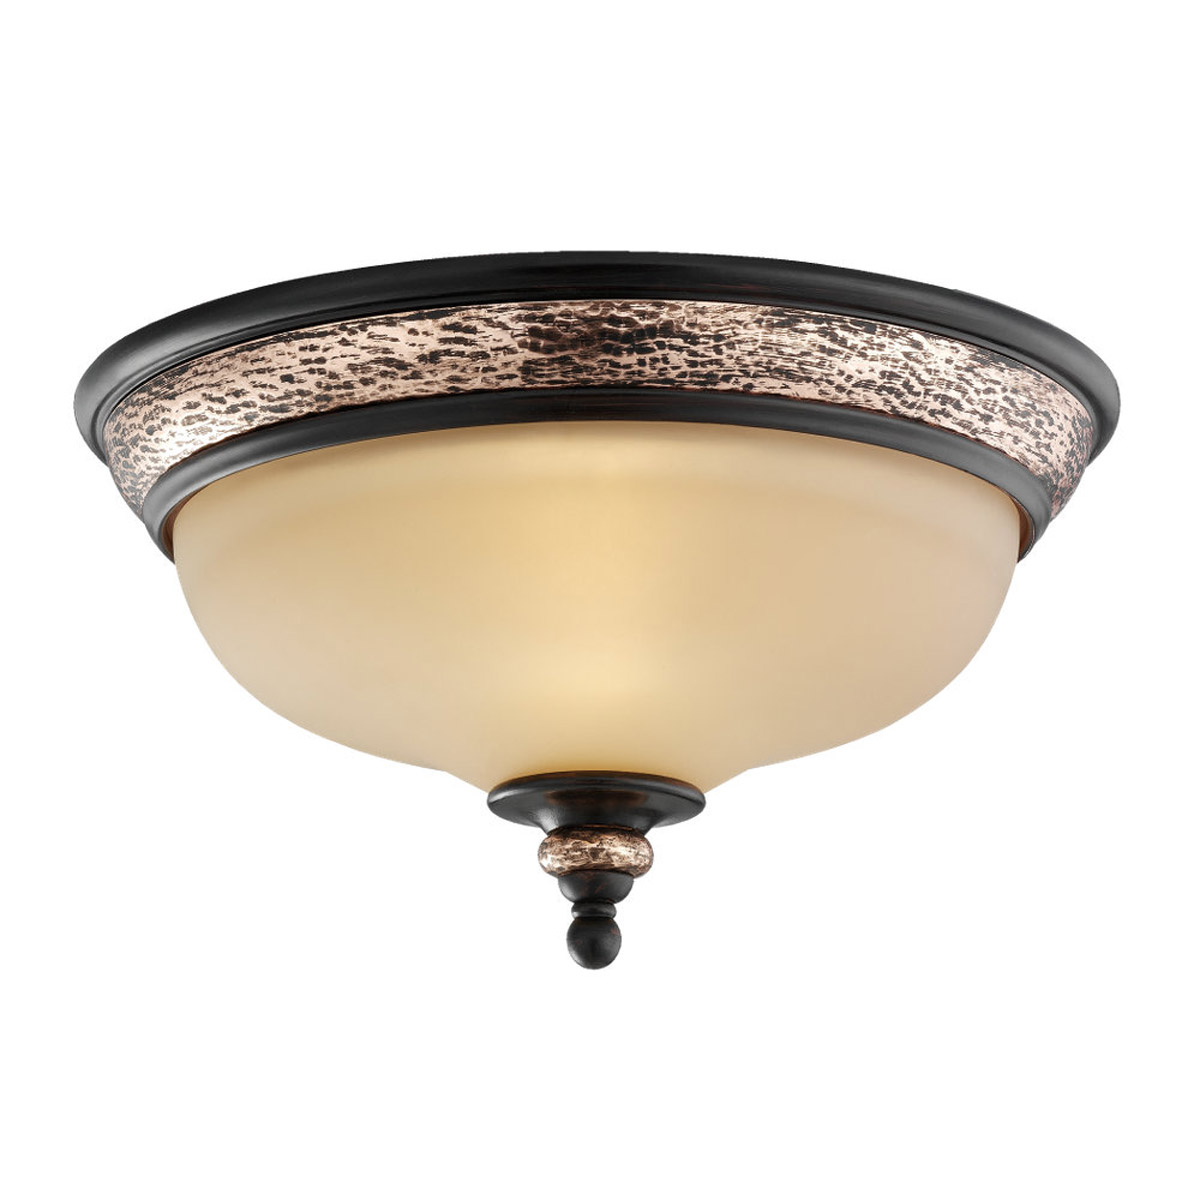 Sea Gull Lighting Brixham 3 Light Flush Mount in Rustic Bronze with Hammered Copper Inlay 75592-844